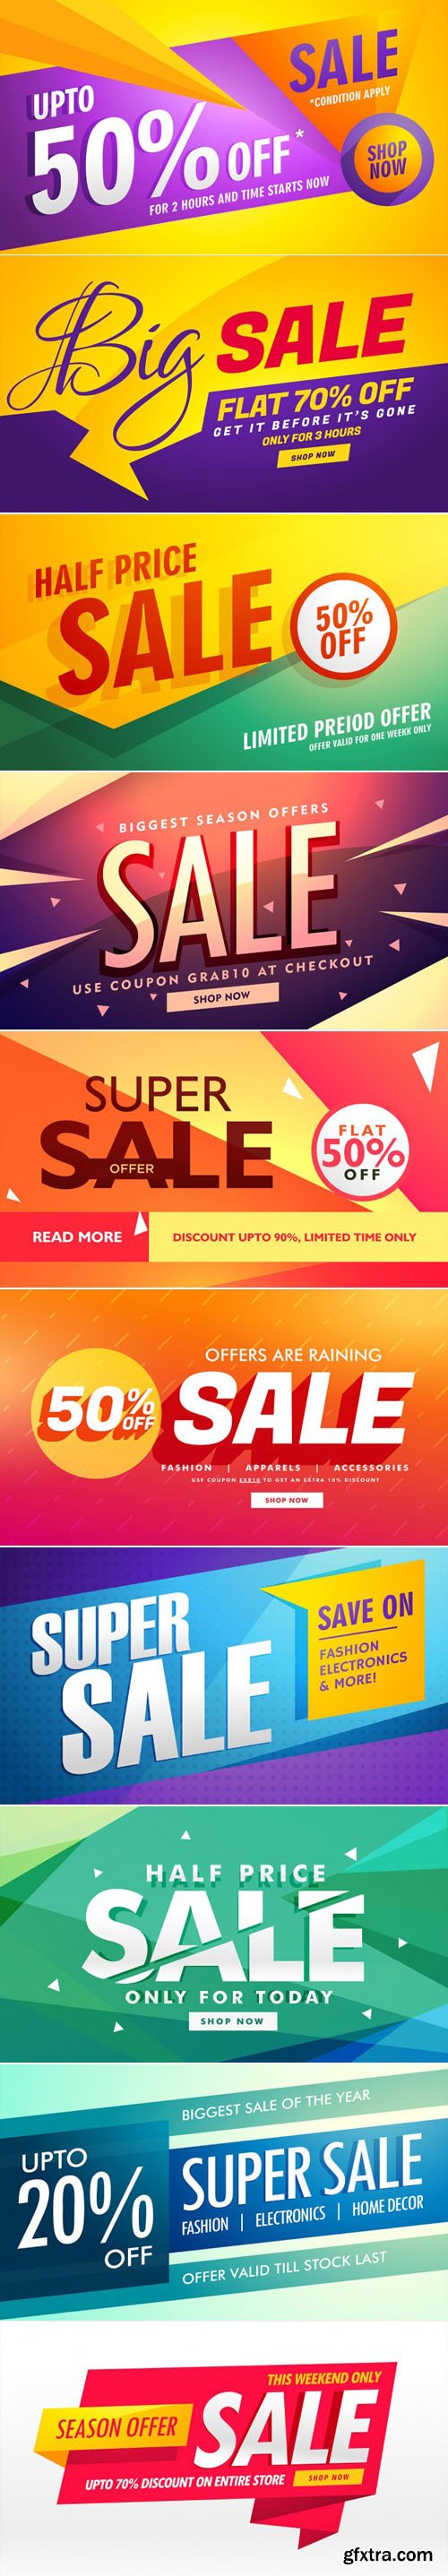 Amazing Colorful Discount Vouchers in Vector [EPS]